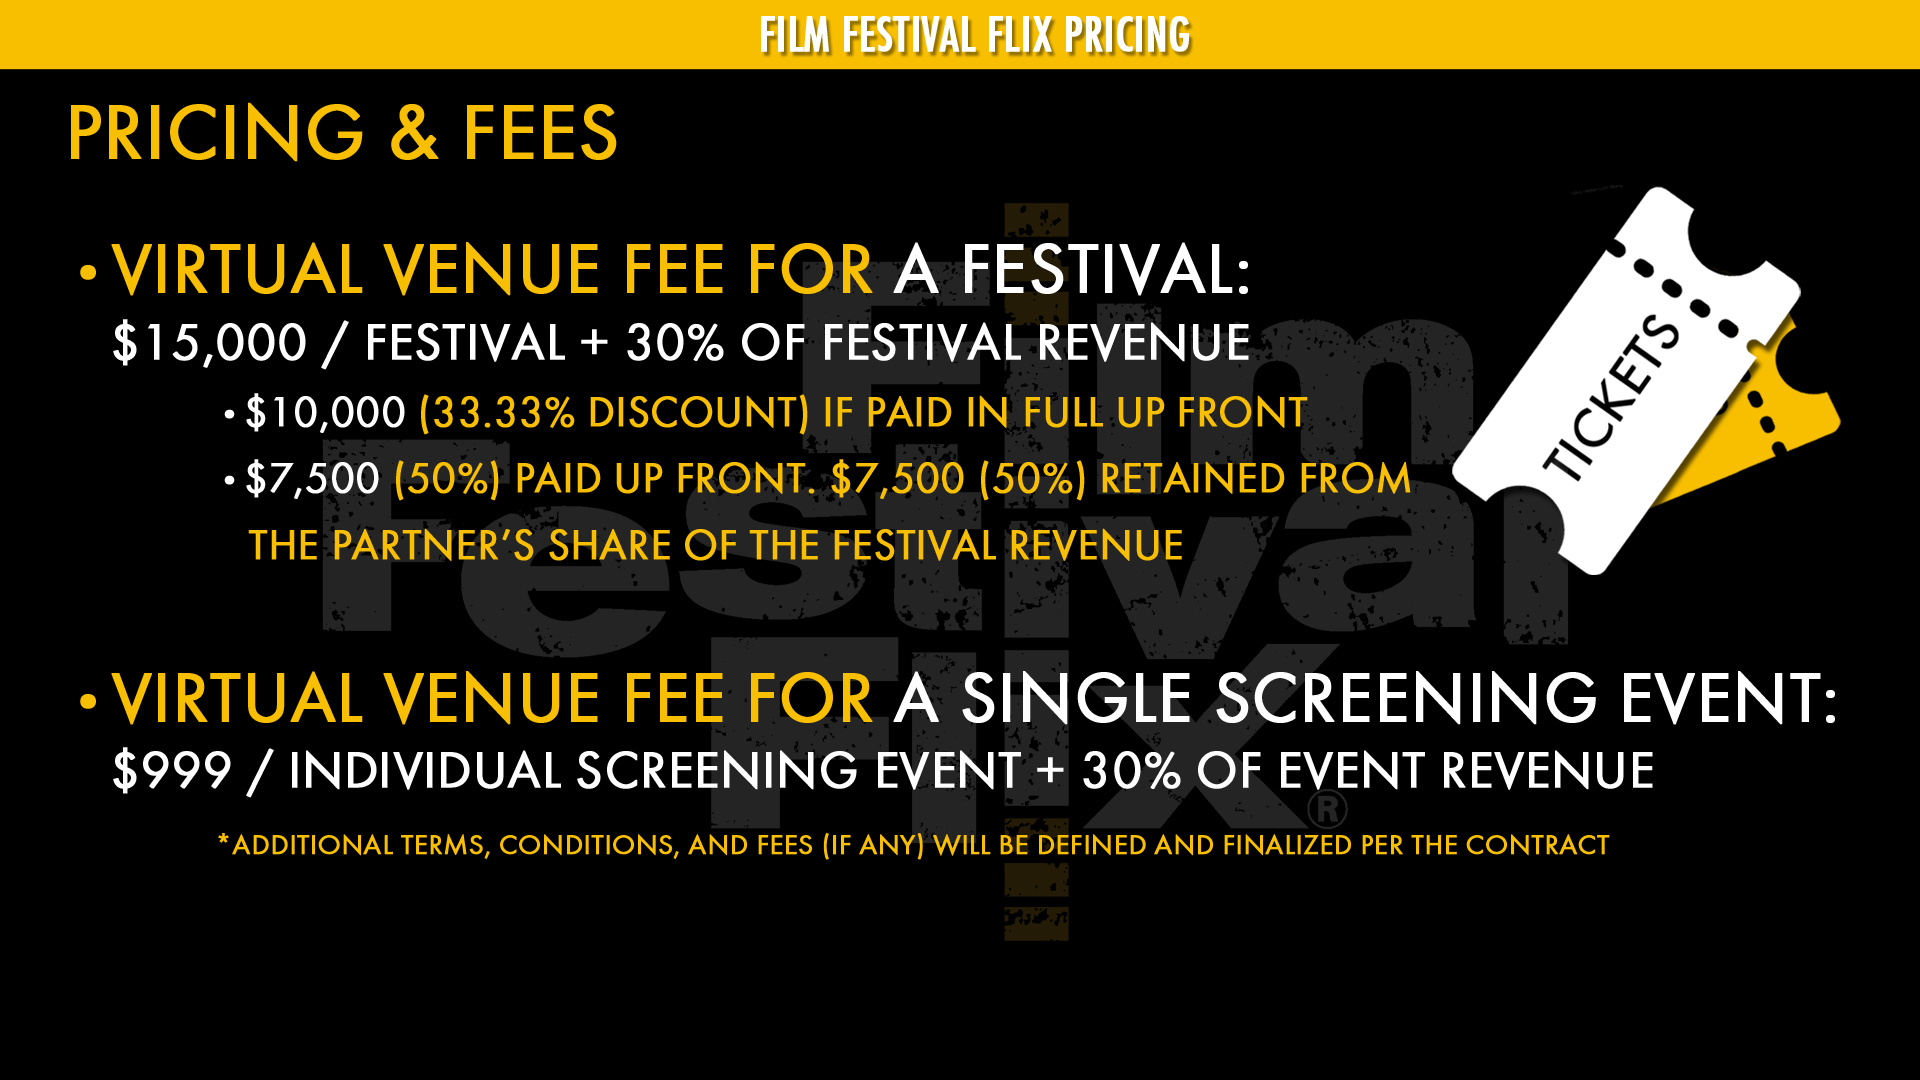 Film Festival Flix pricing page 3